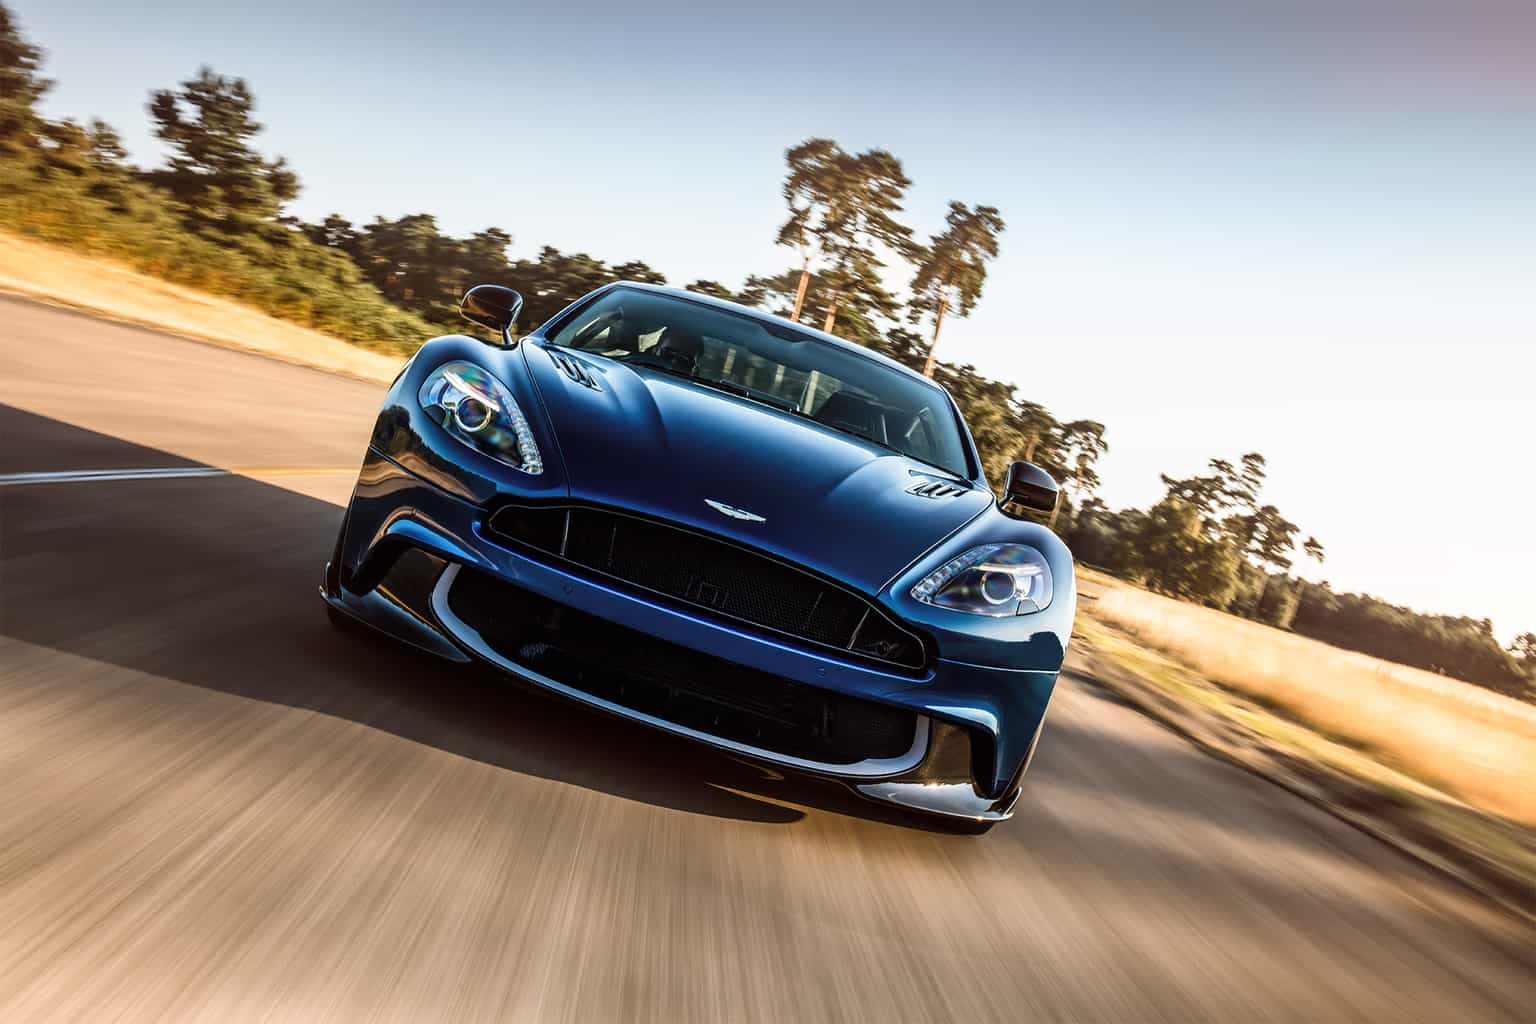 2018-Aston-Martin-Vanquish-S-front-view-in-motion